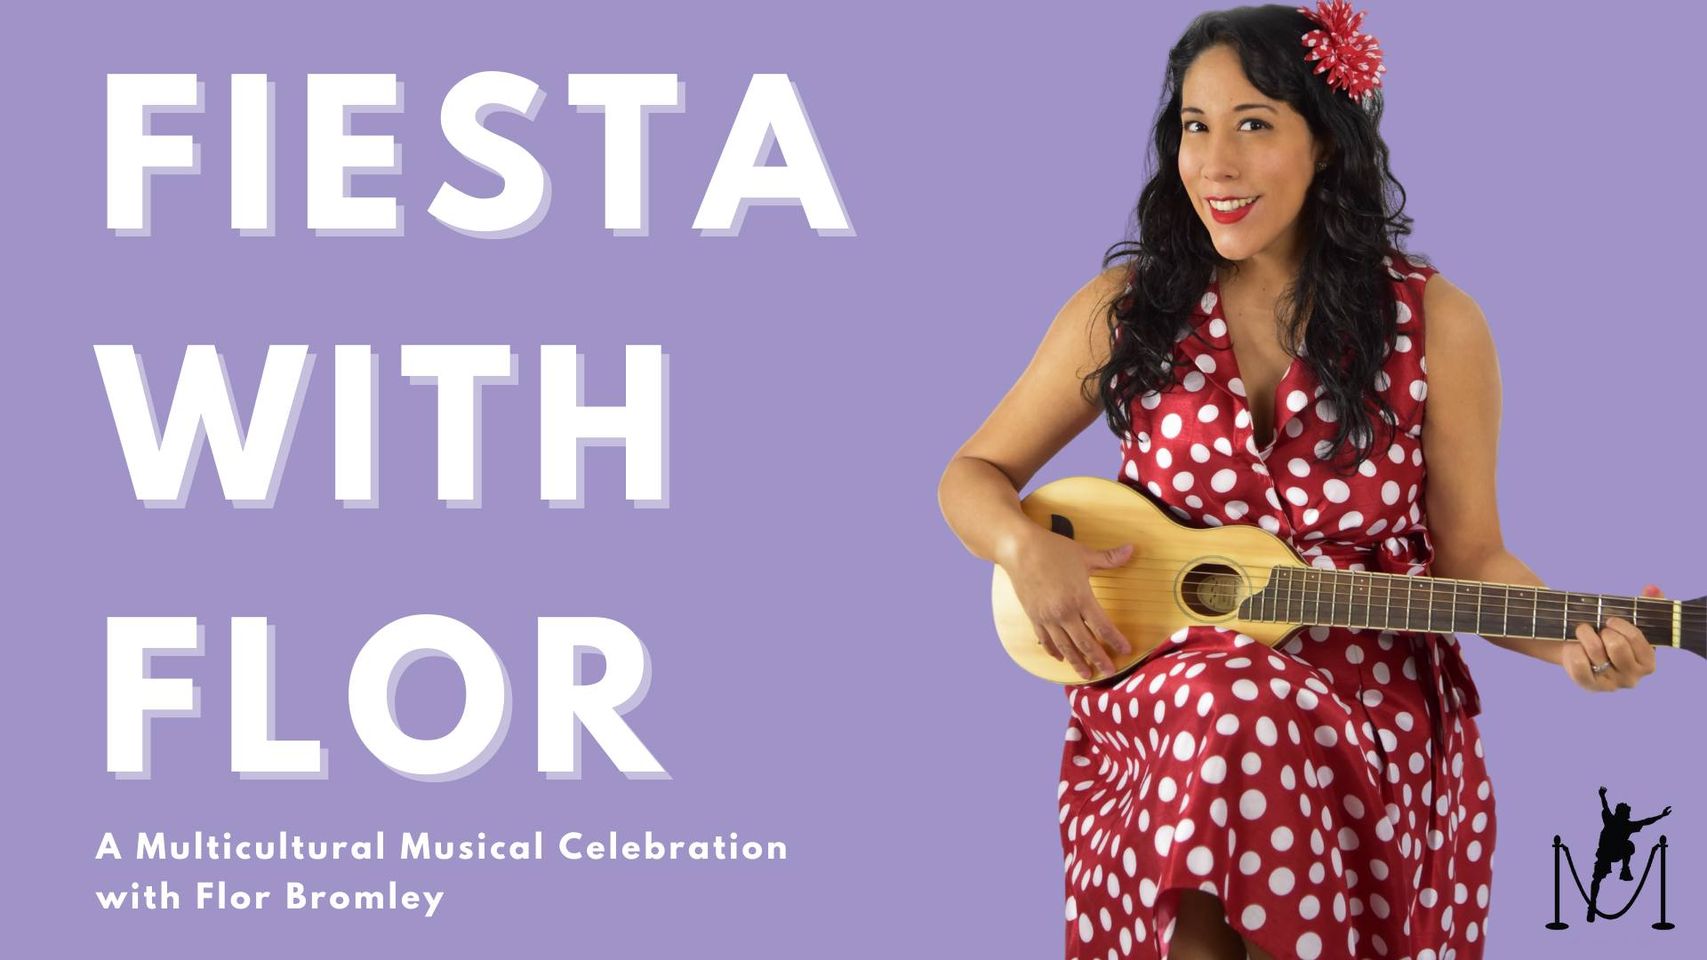 May be an image of 1 person, standing, guitar and text that says 'FIESTA WITH FLOR A Multicultural Musical Celebration with Flor Bromley N'